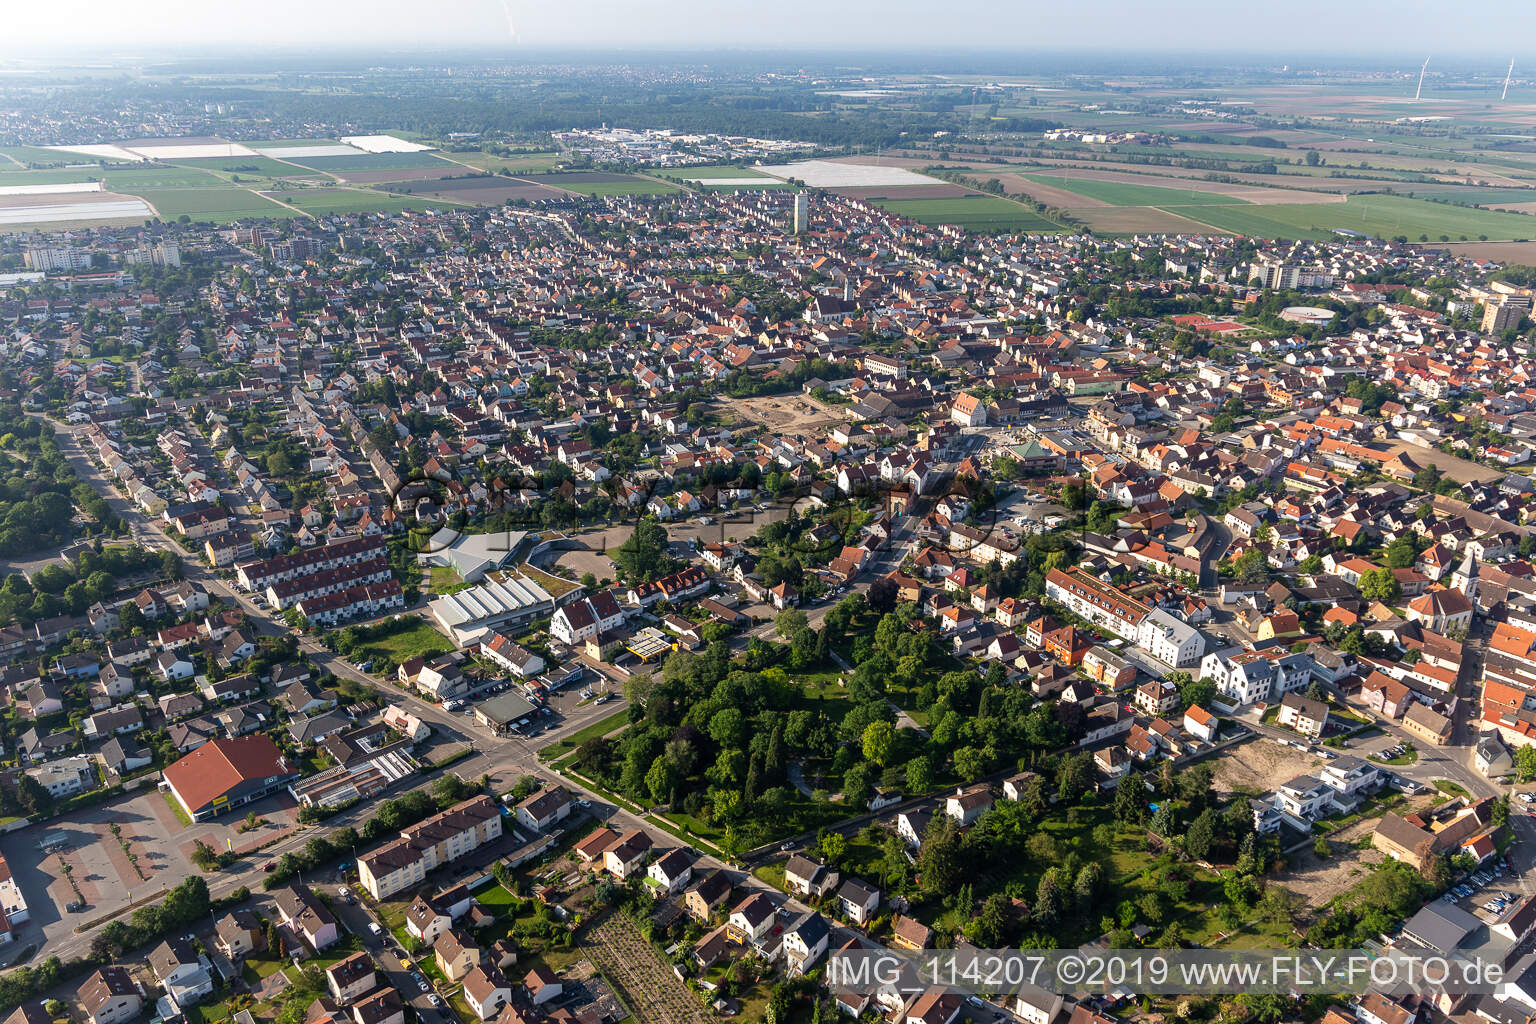 Aerial photograpy of Mutterstadt in the state Rhineland-Palatinate, Germany